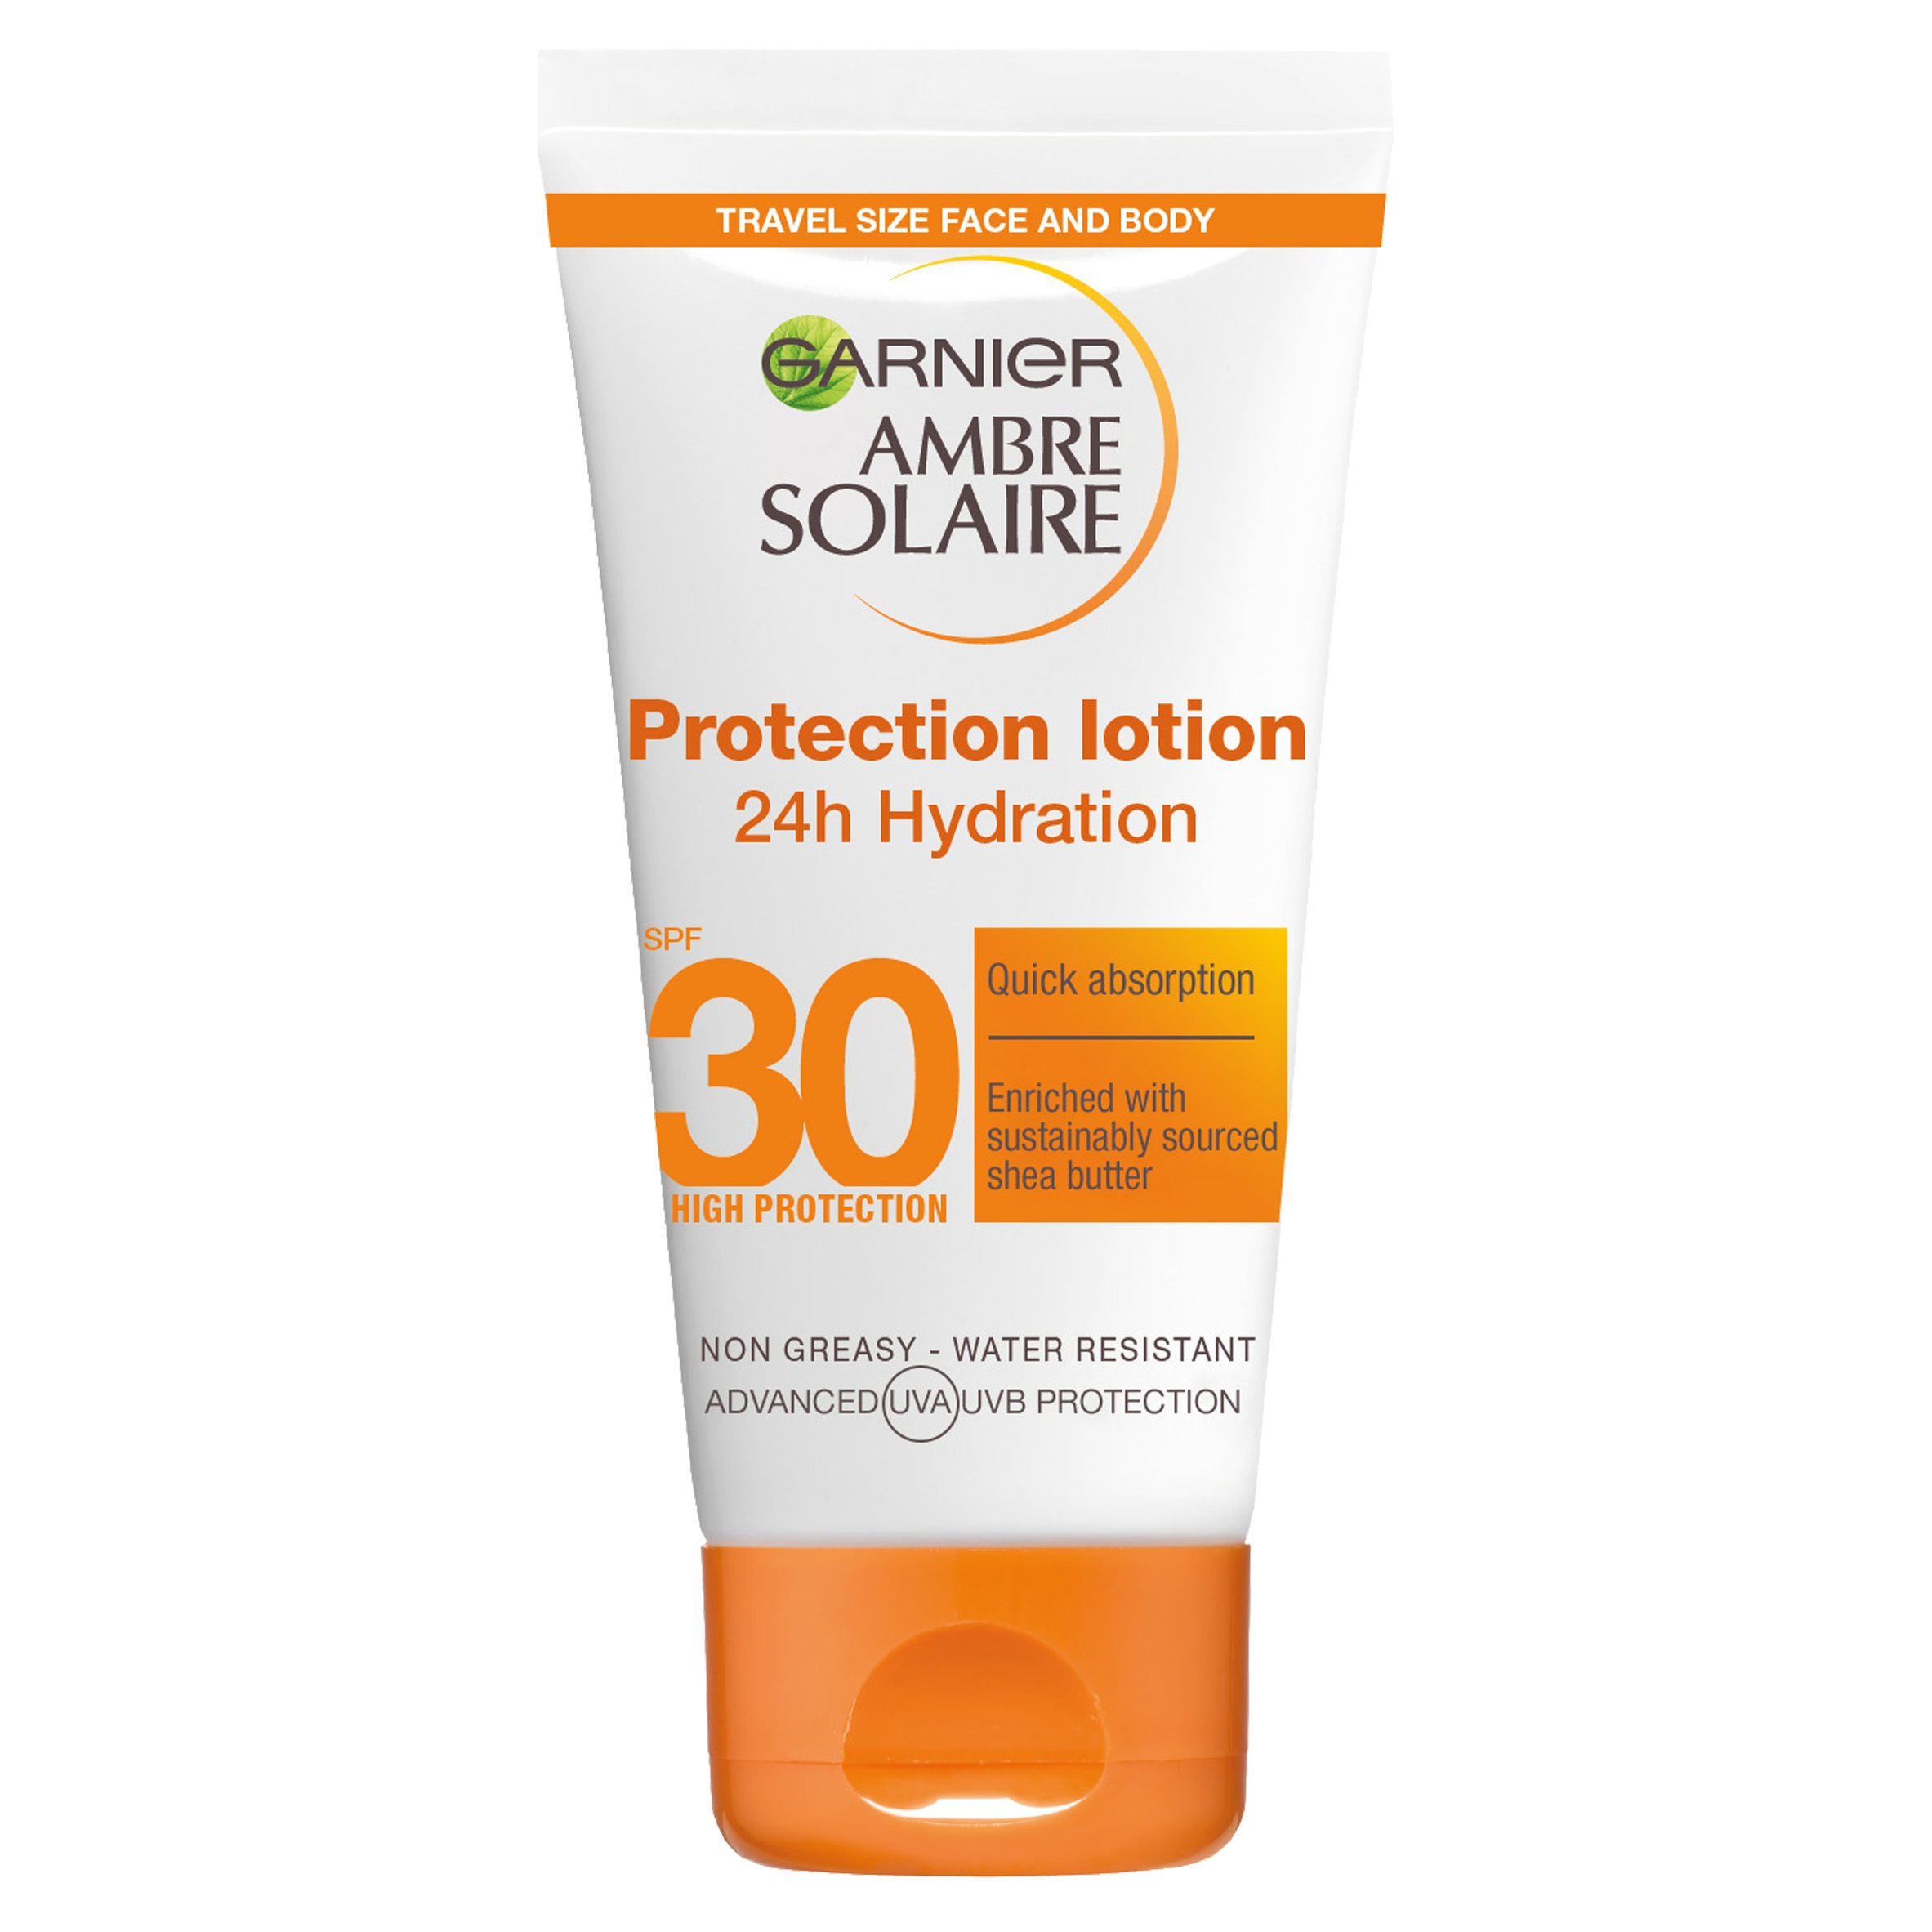 Inflation has driven the cost of the Garnier Ambre Solaire up by 49%